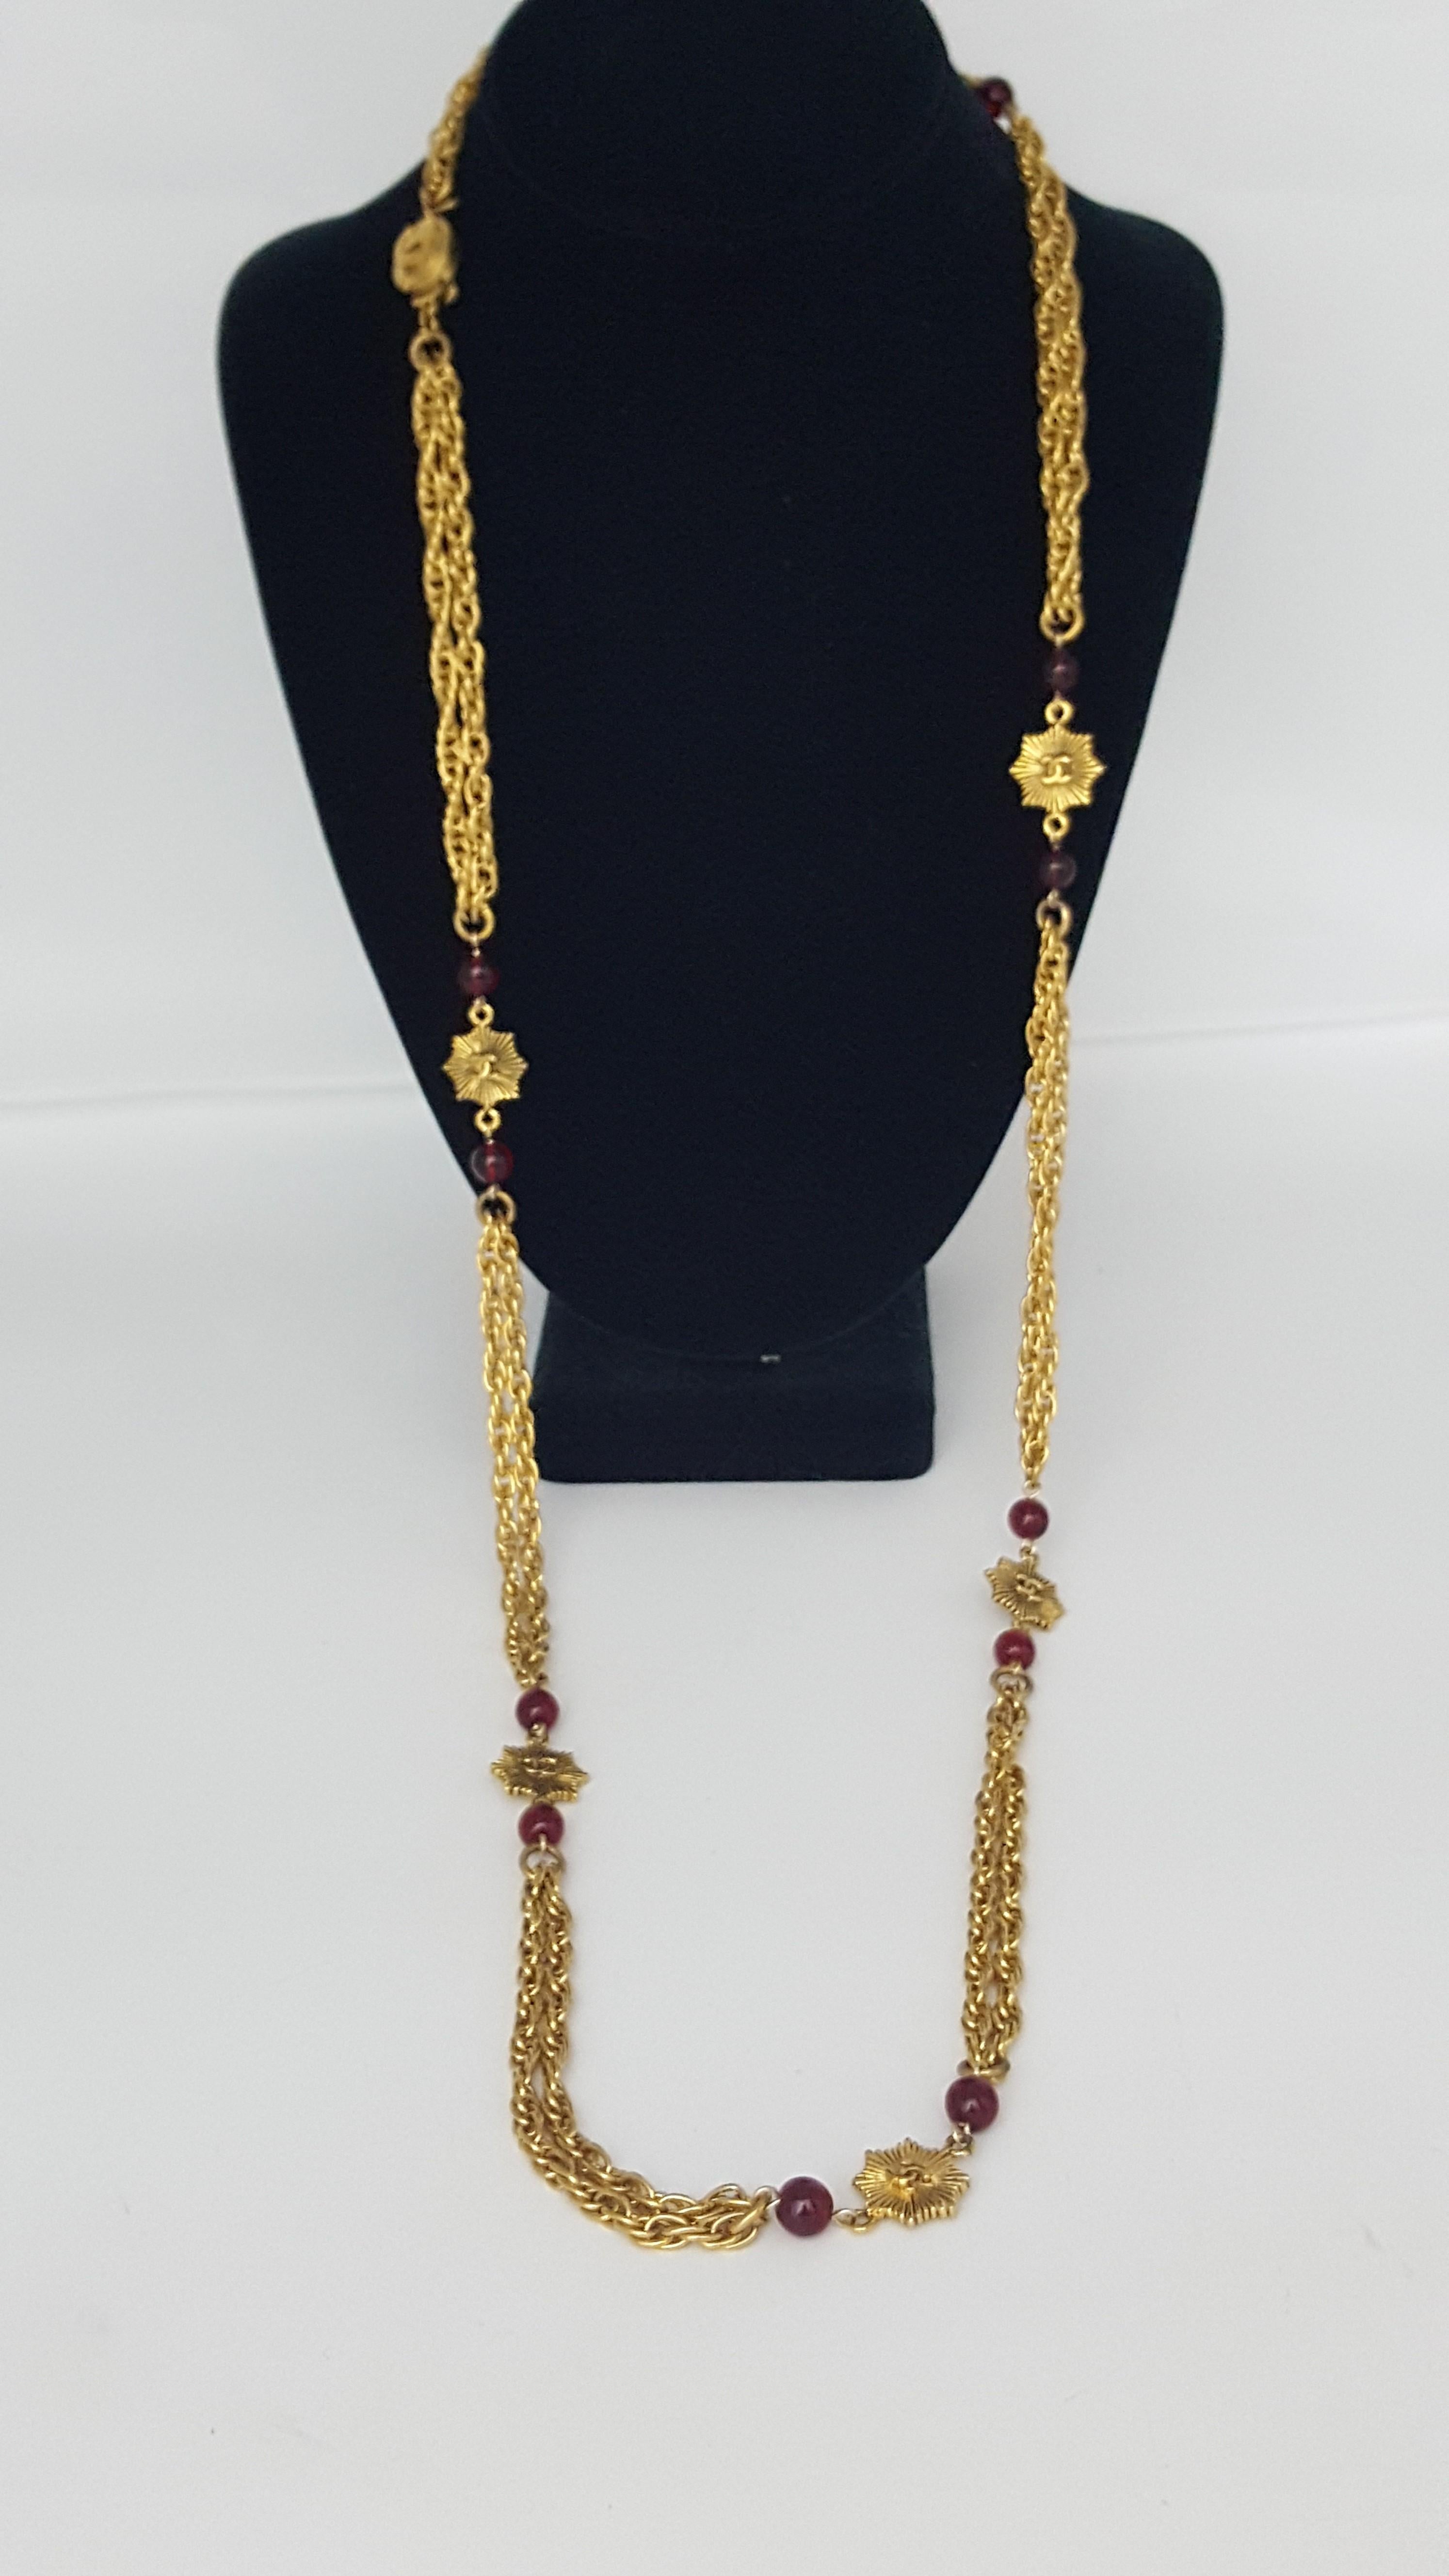 Offered for sale is this beautiful vintage Chanel necklace from 1984.  There are 12 ruby gripoix beads with 7 gold tone double sided  CC medallions in between.  The beautiful chain is doubled between each. There is a CC clasp are rear of necklace. 